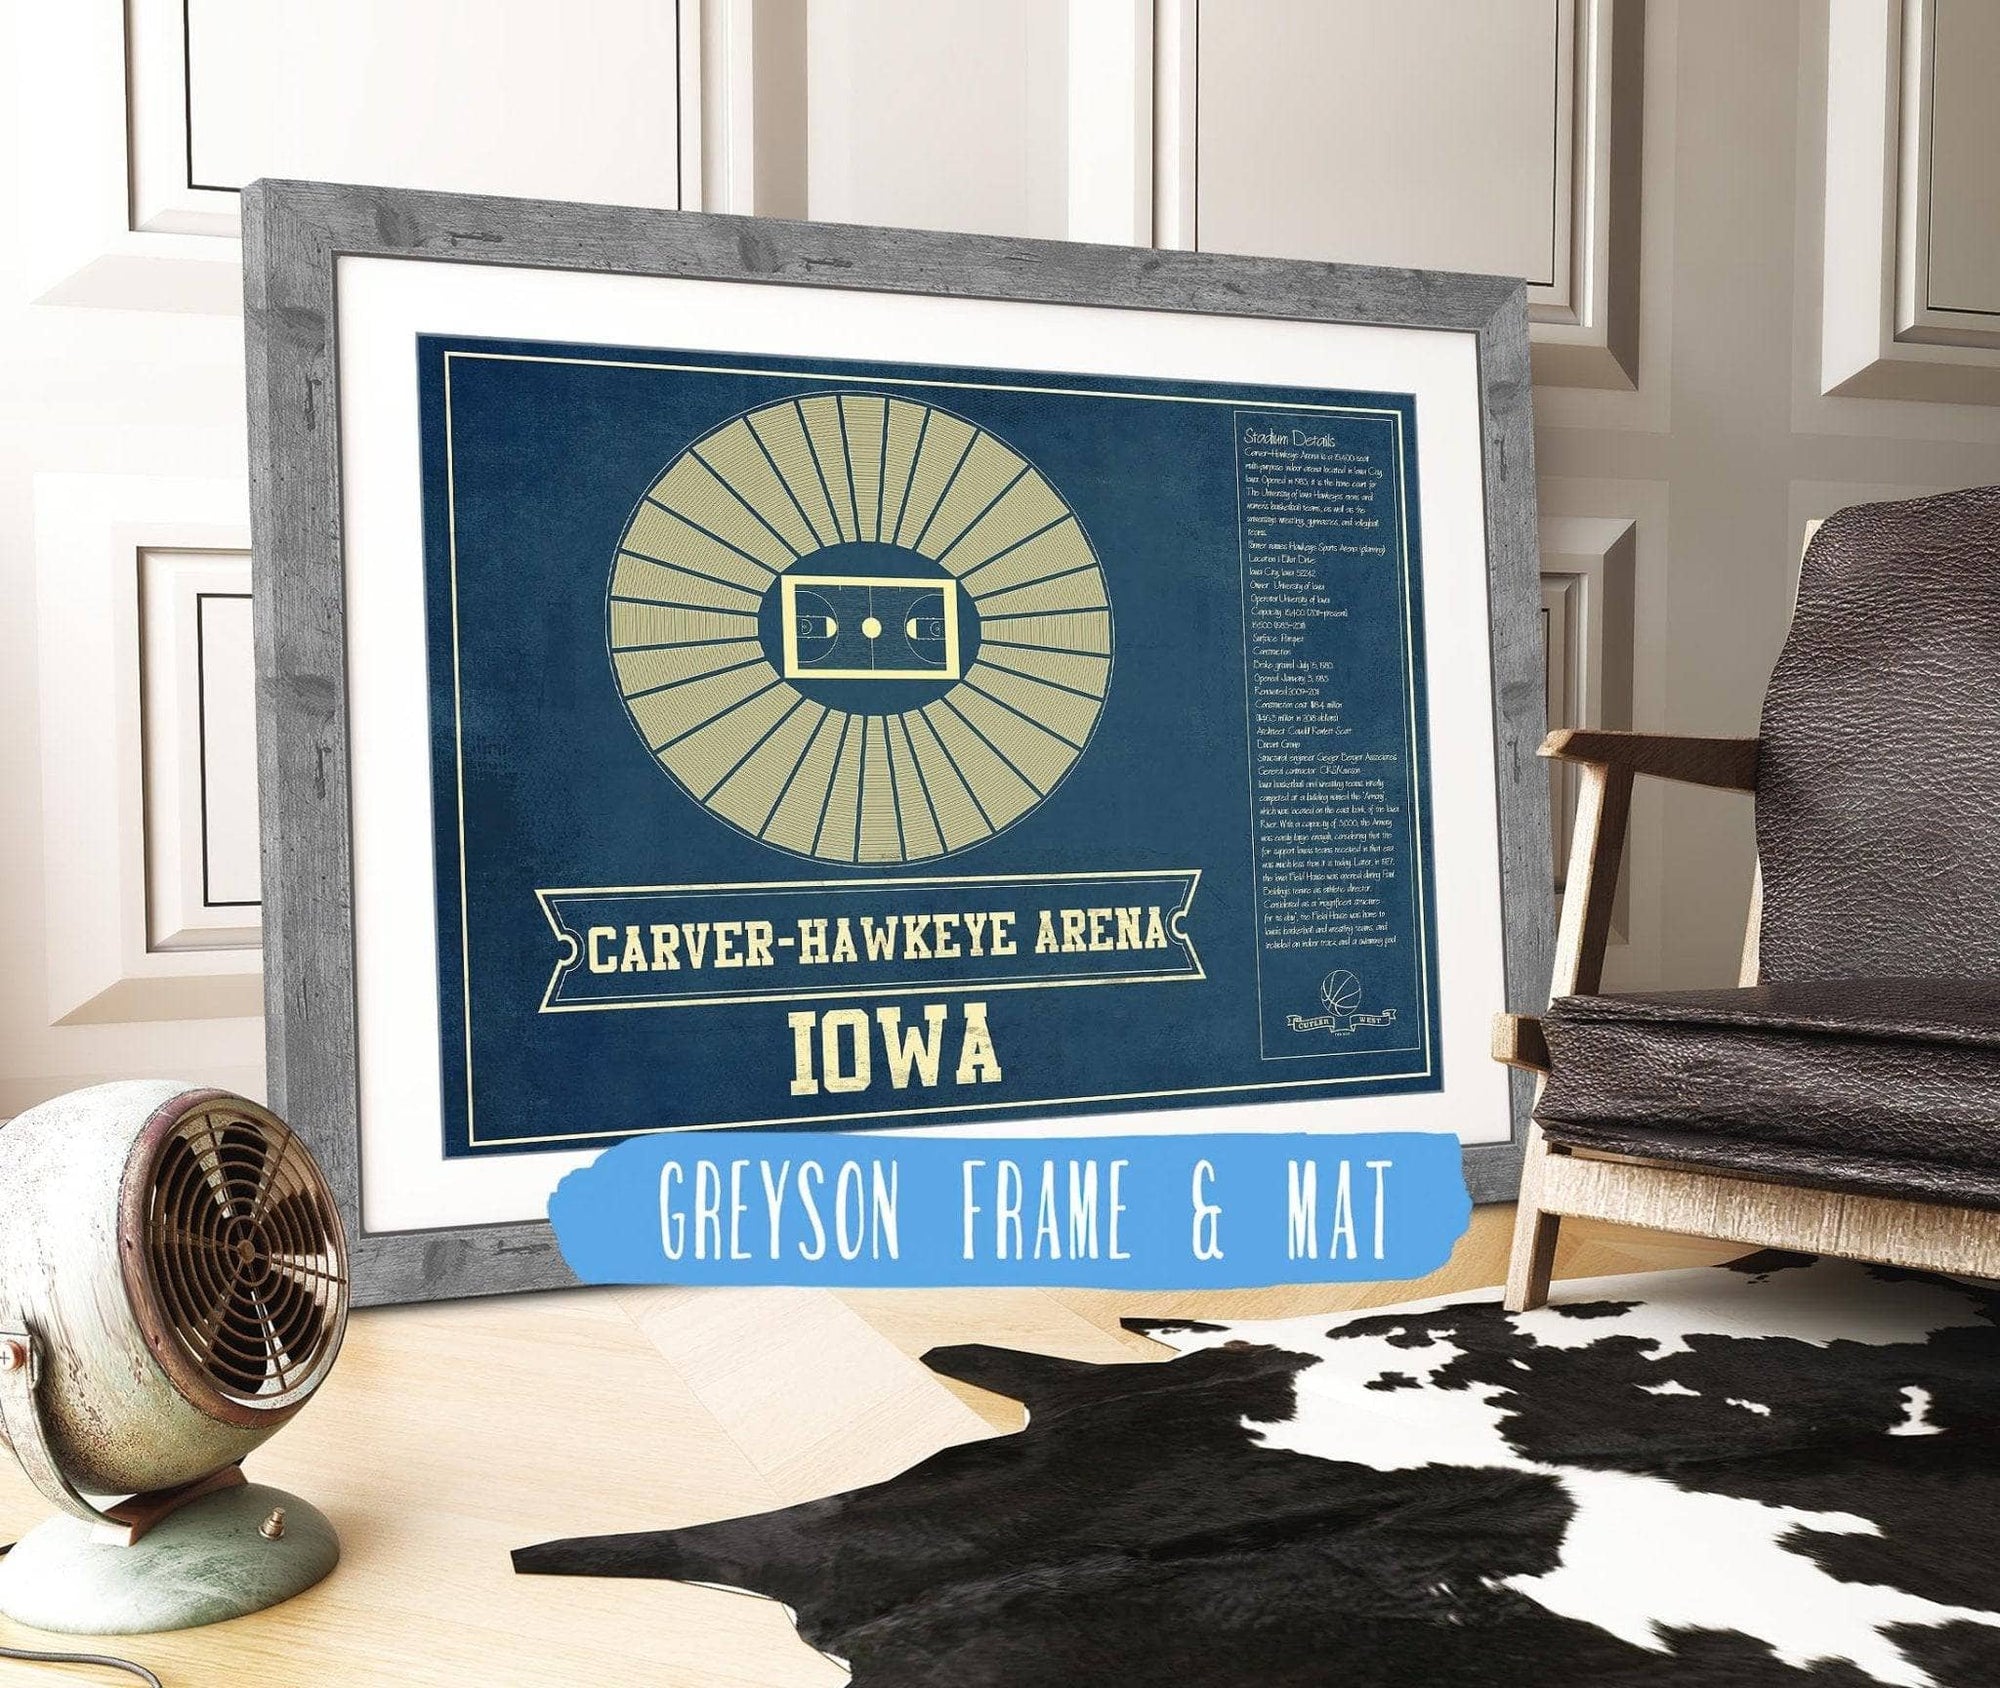 Cutler West Basketball Collection 14" x 11" / Greyson Frame & Mat Carver–Hawkeye Arena Iowa Men's And Women's Basketball Vintage Print 933350233_83434